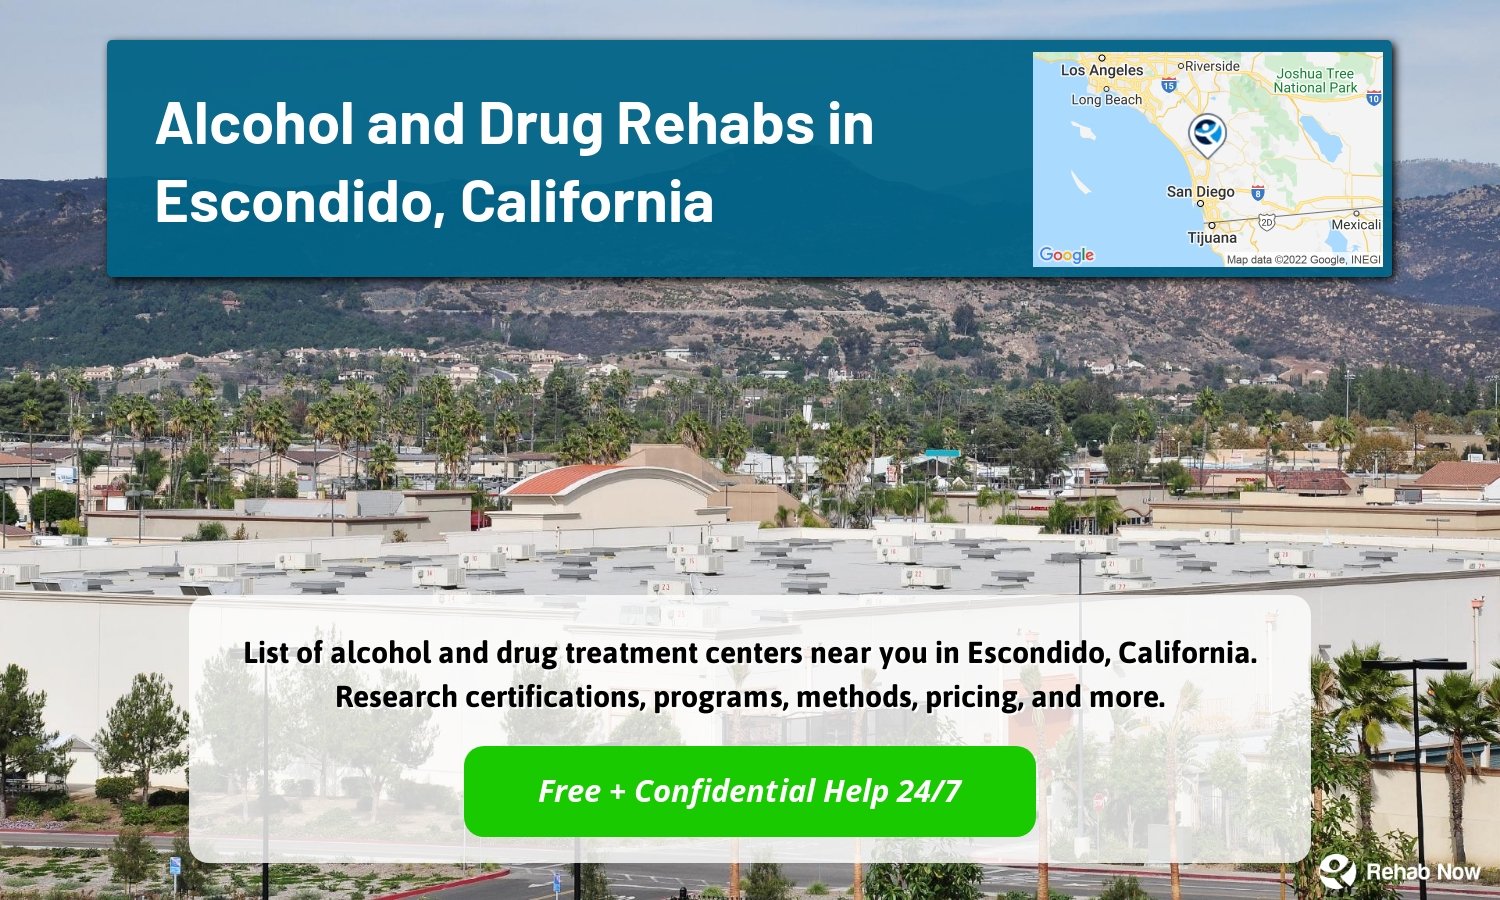 List of alcohol and drug treatment centers near you in Escondido, California. Research certifications, programs, methods, pricing, and more.